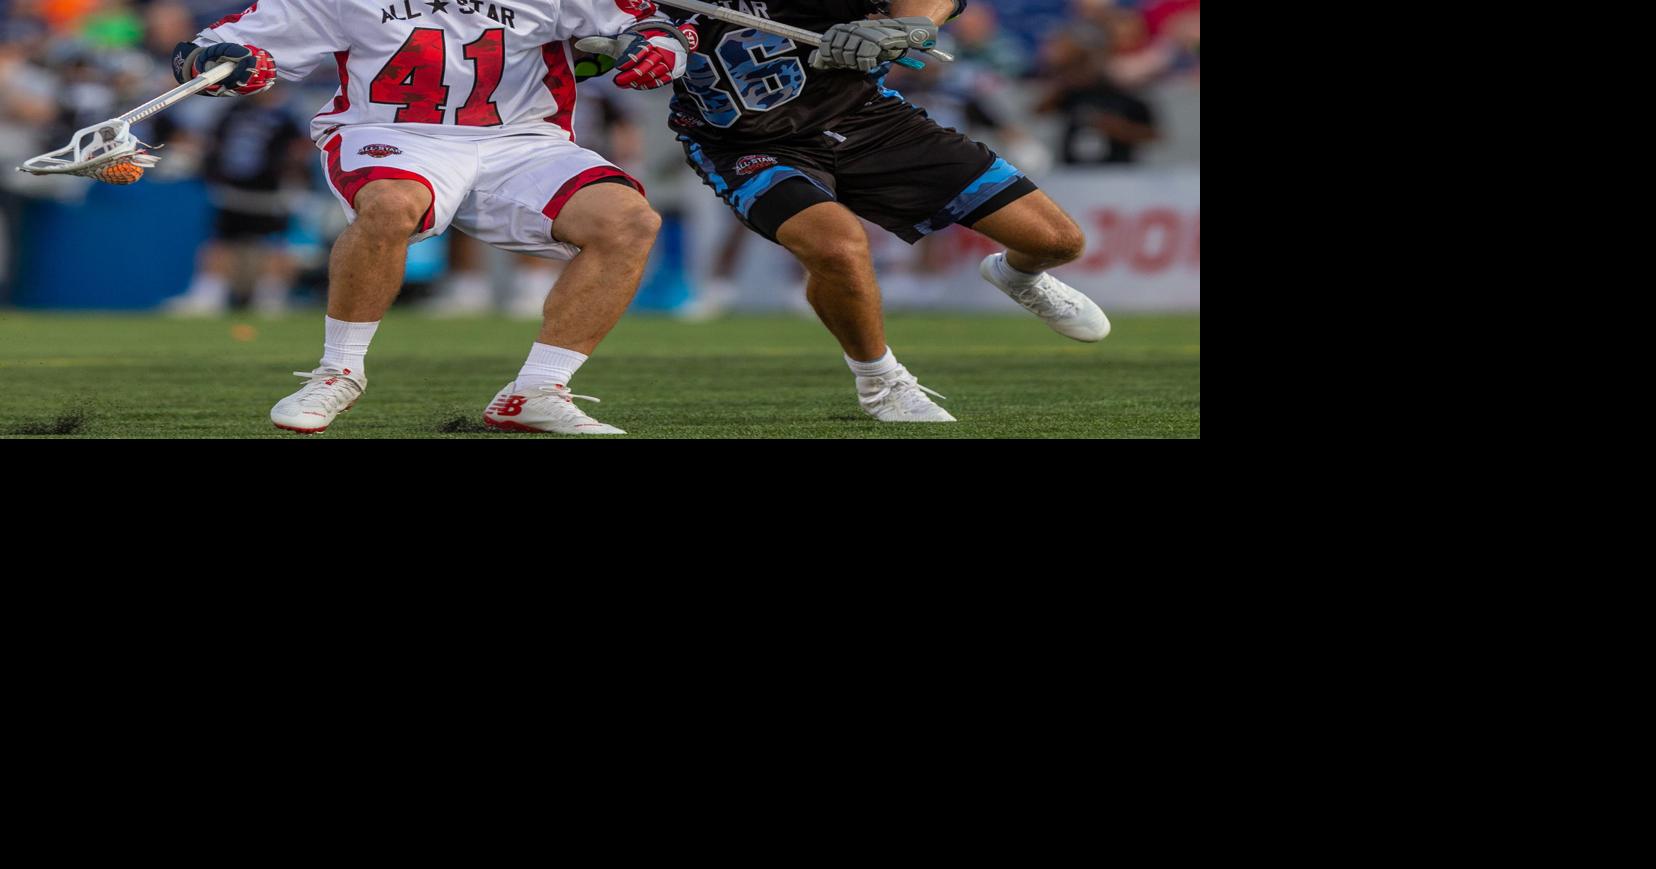 Rob Pannell Named Major League Lacrosse MVP